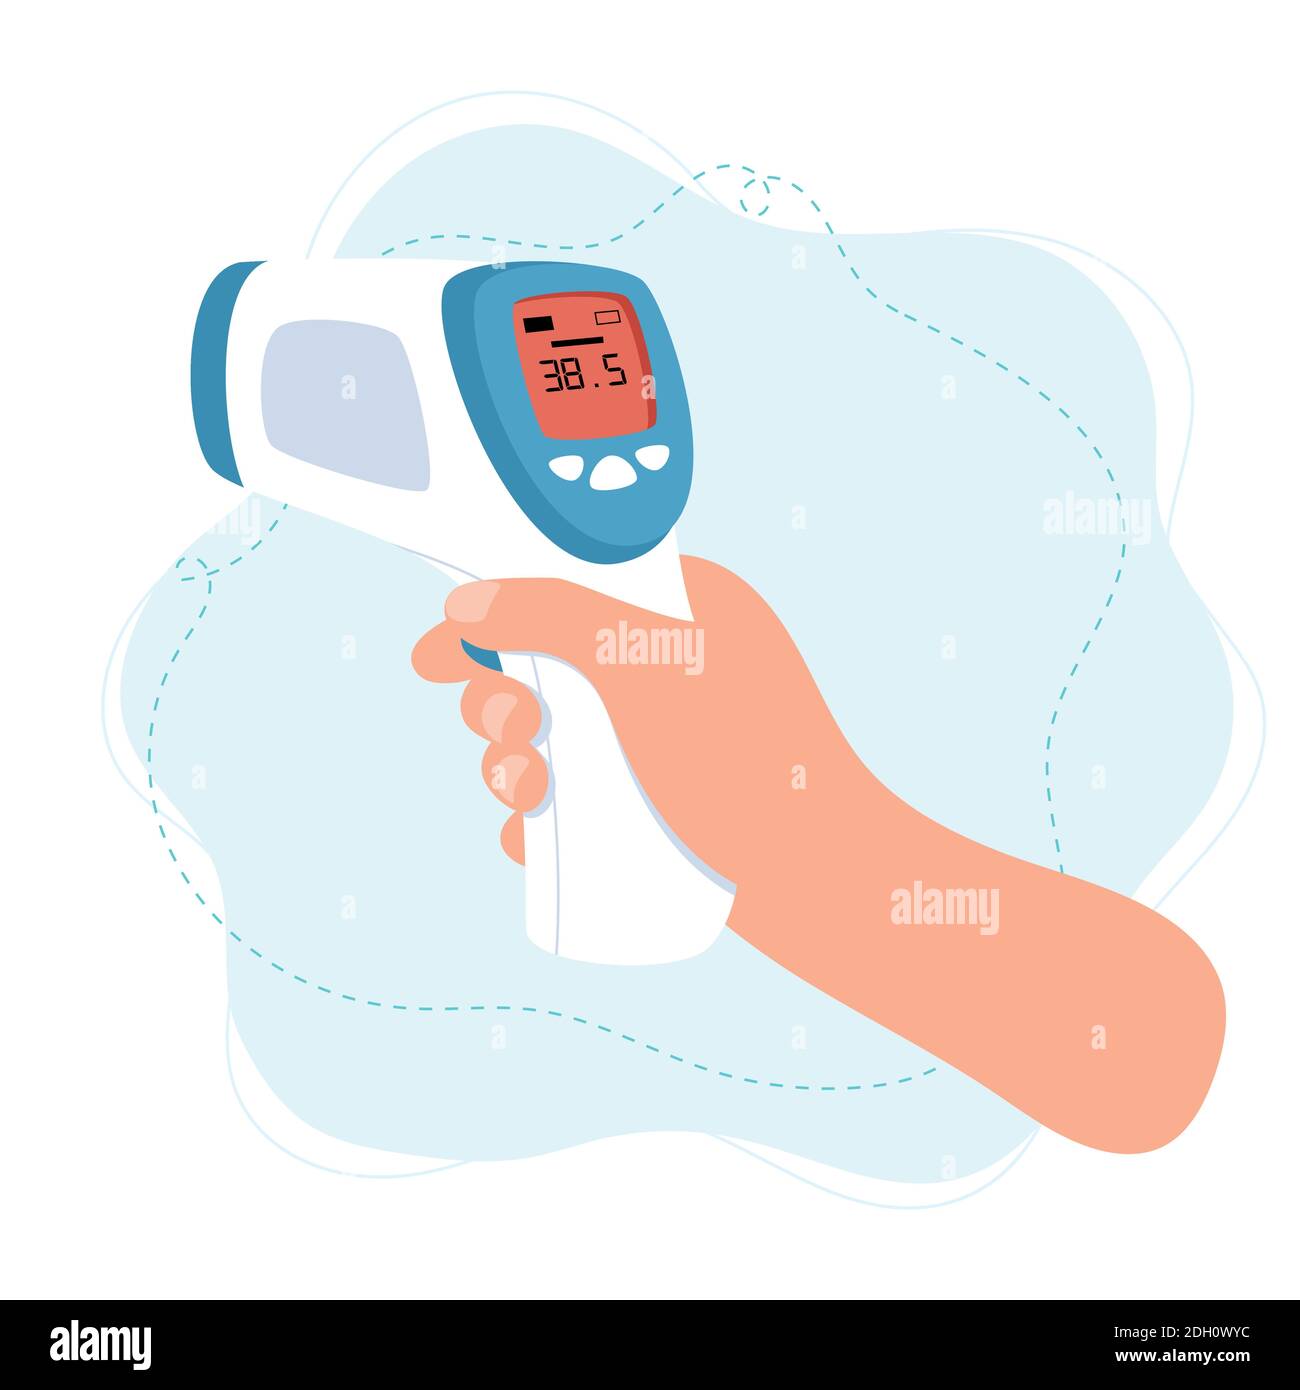 Body temperature check, hand holding infrared thermometer. Stock Vector